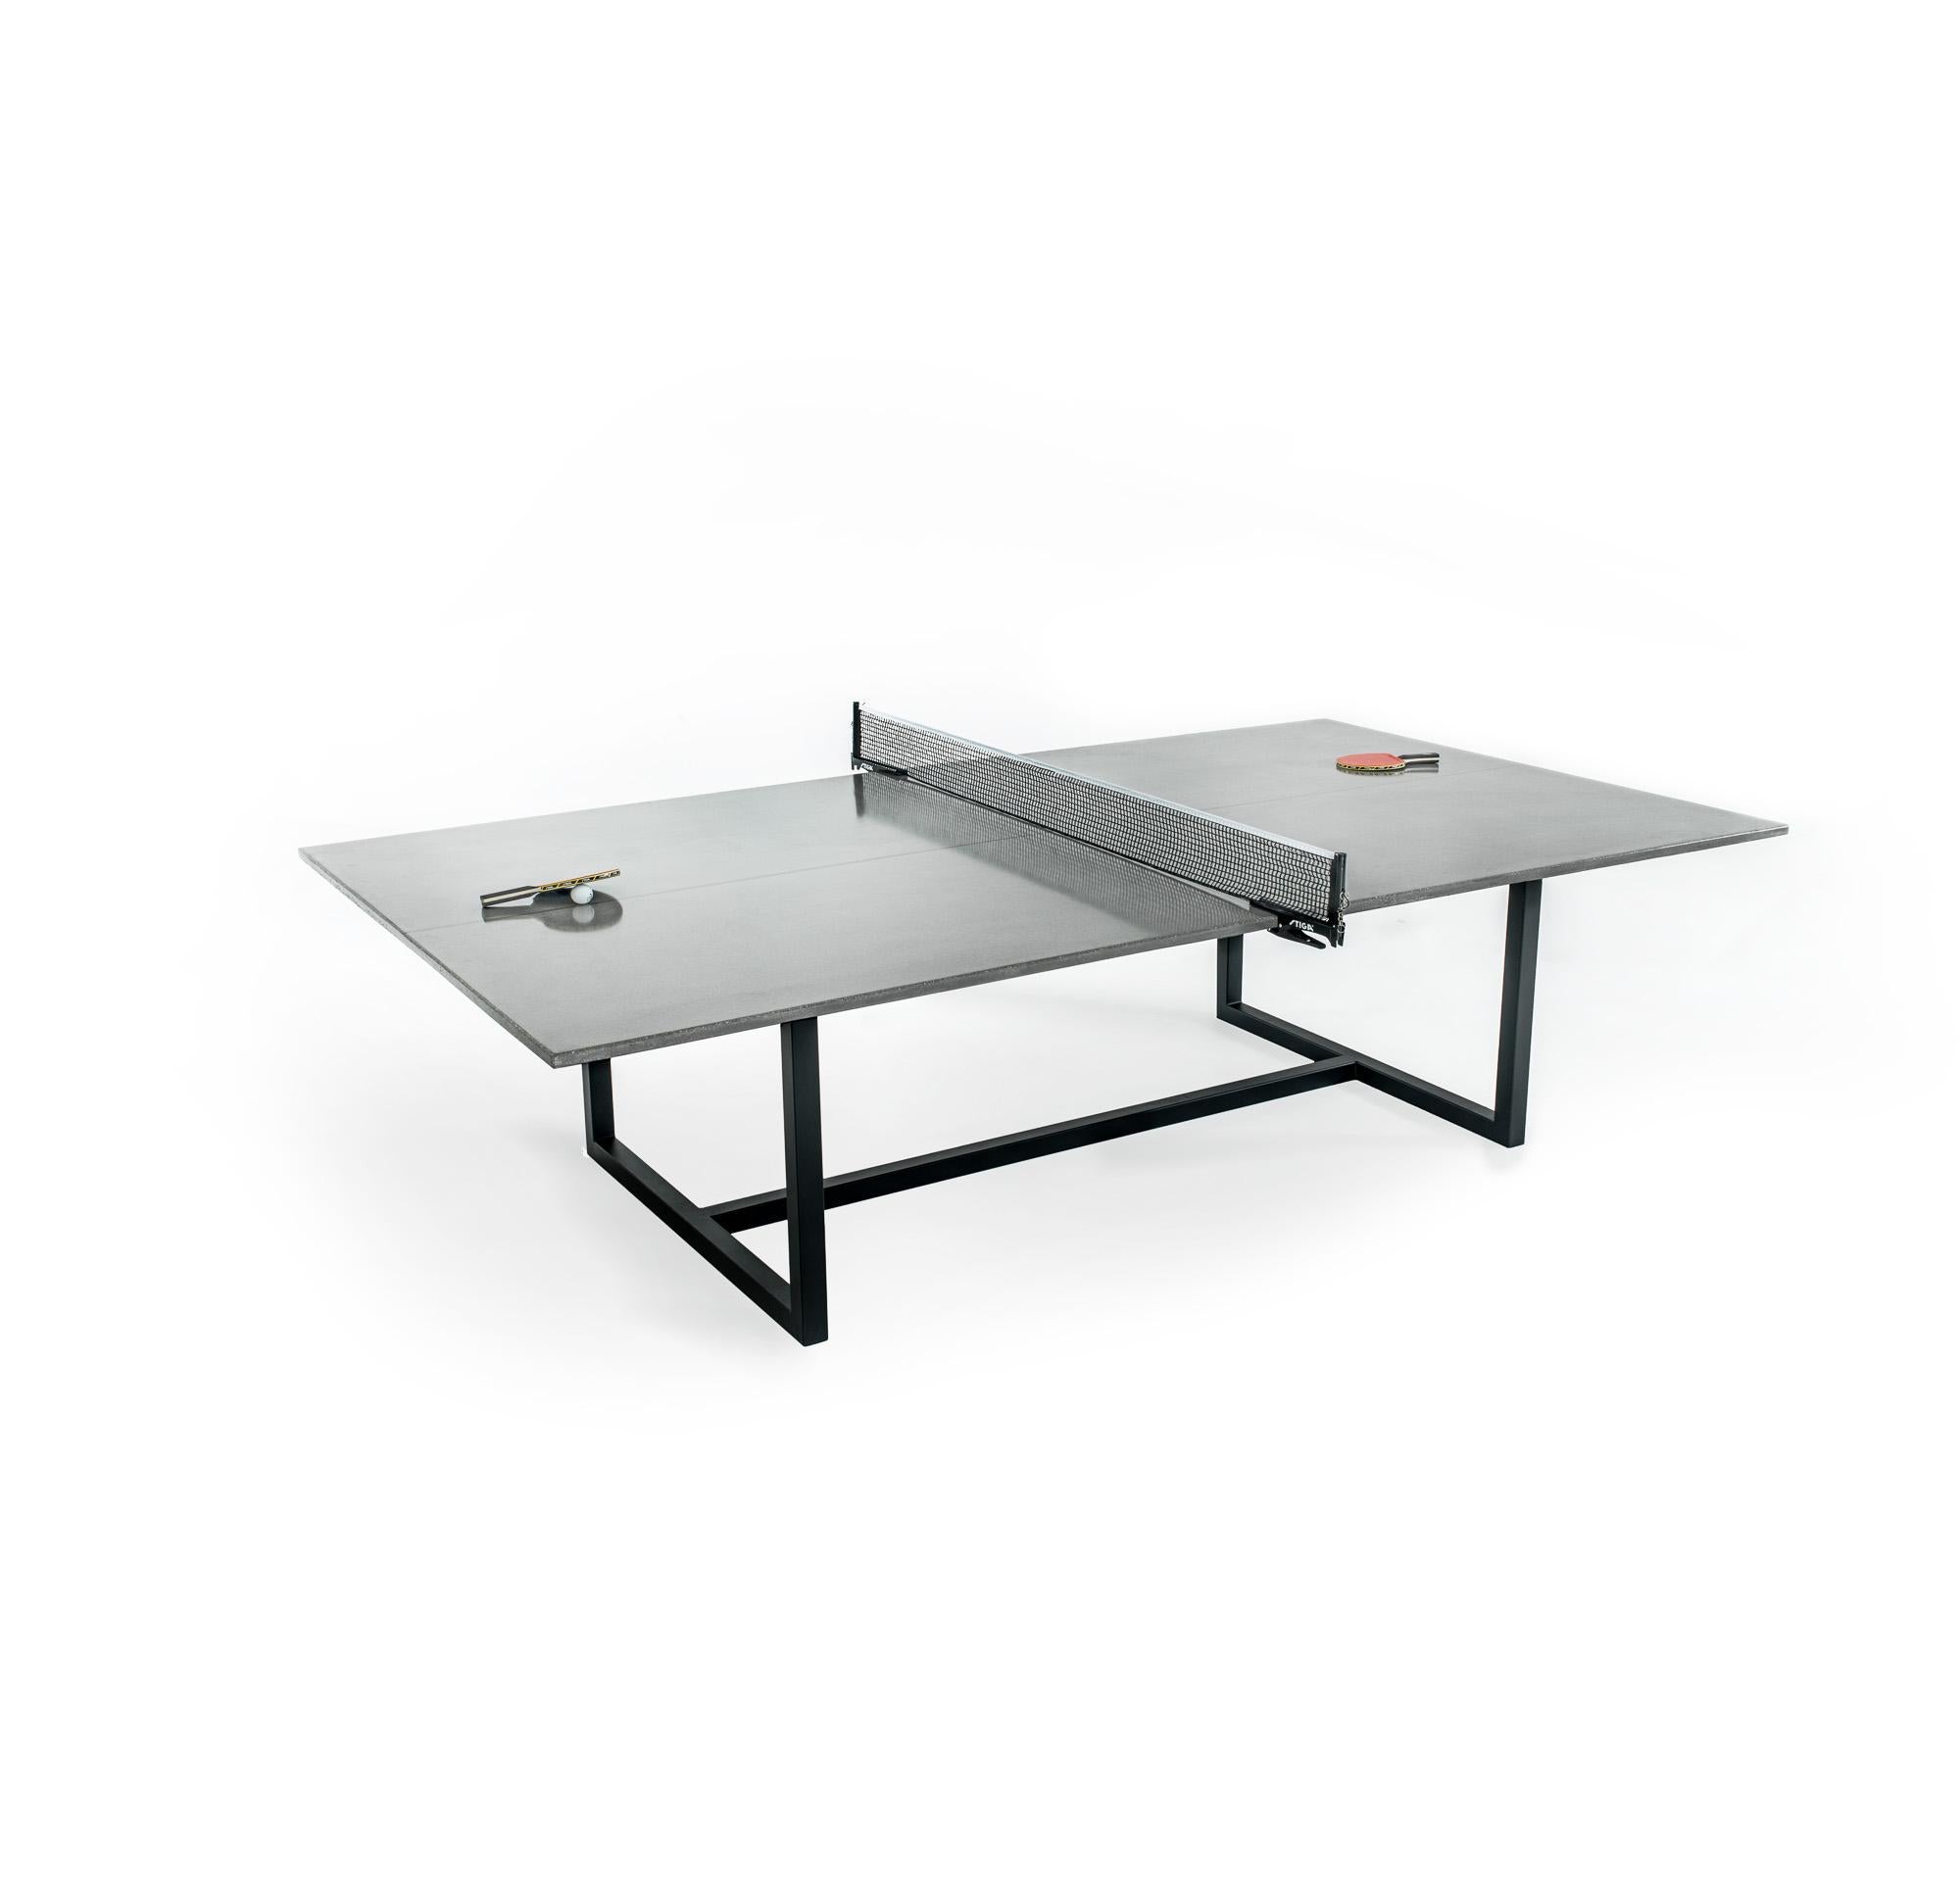 Modern James de Wulf Vue Concrete Ping Pong Table, Powder Coated Steel Base - Standard For Sale